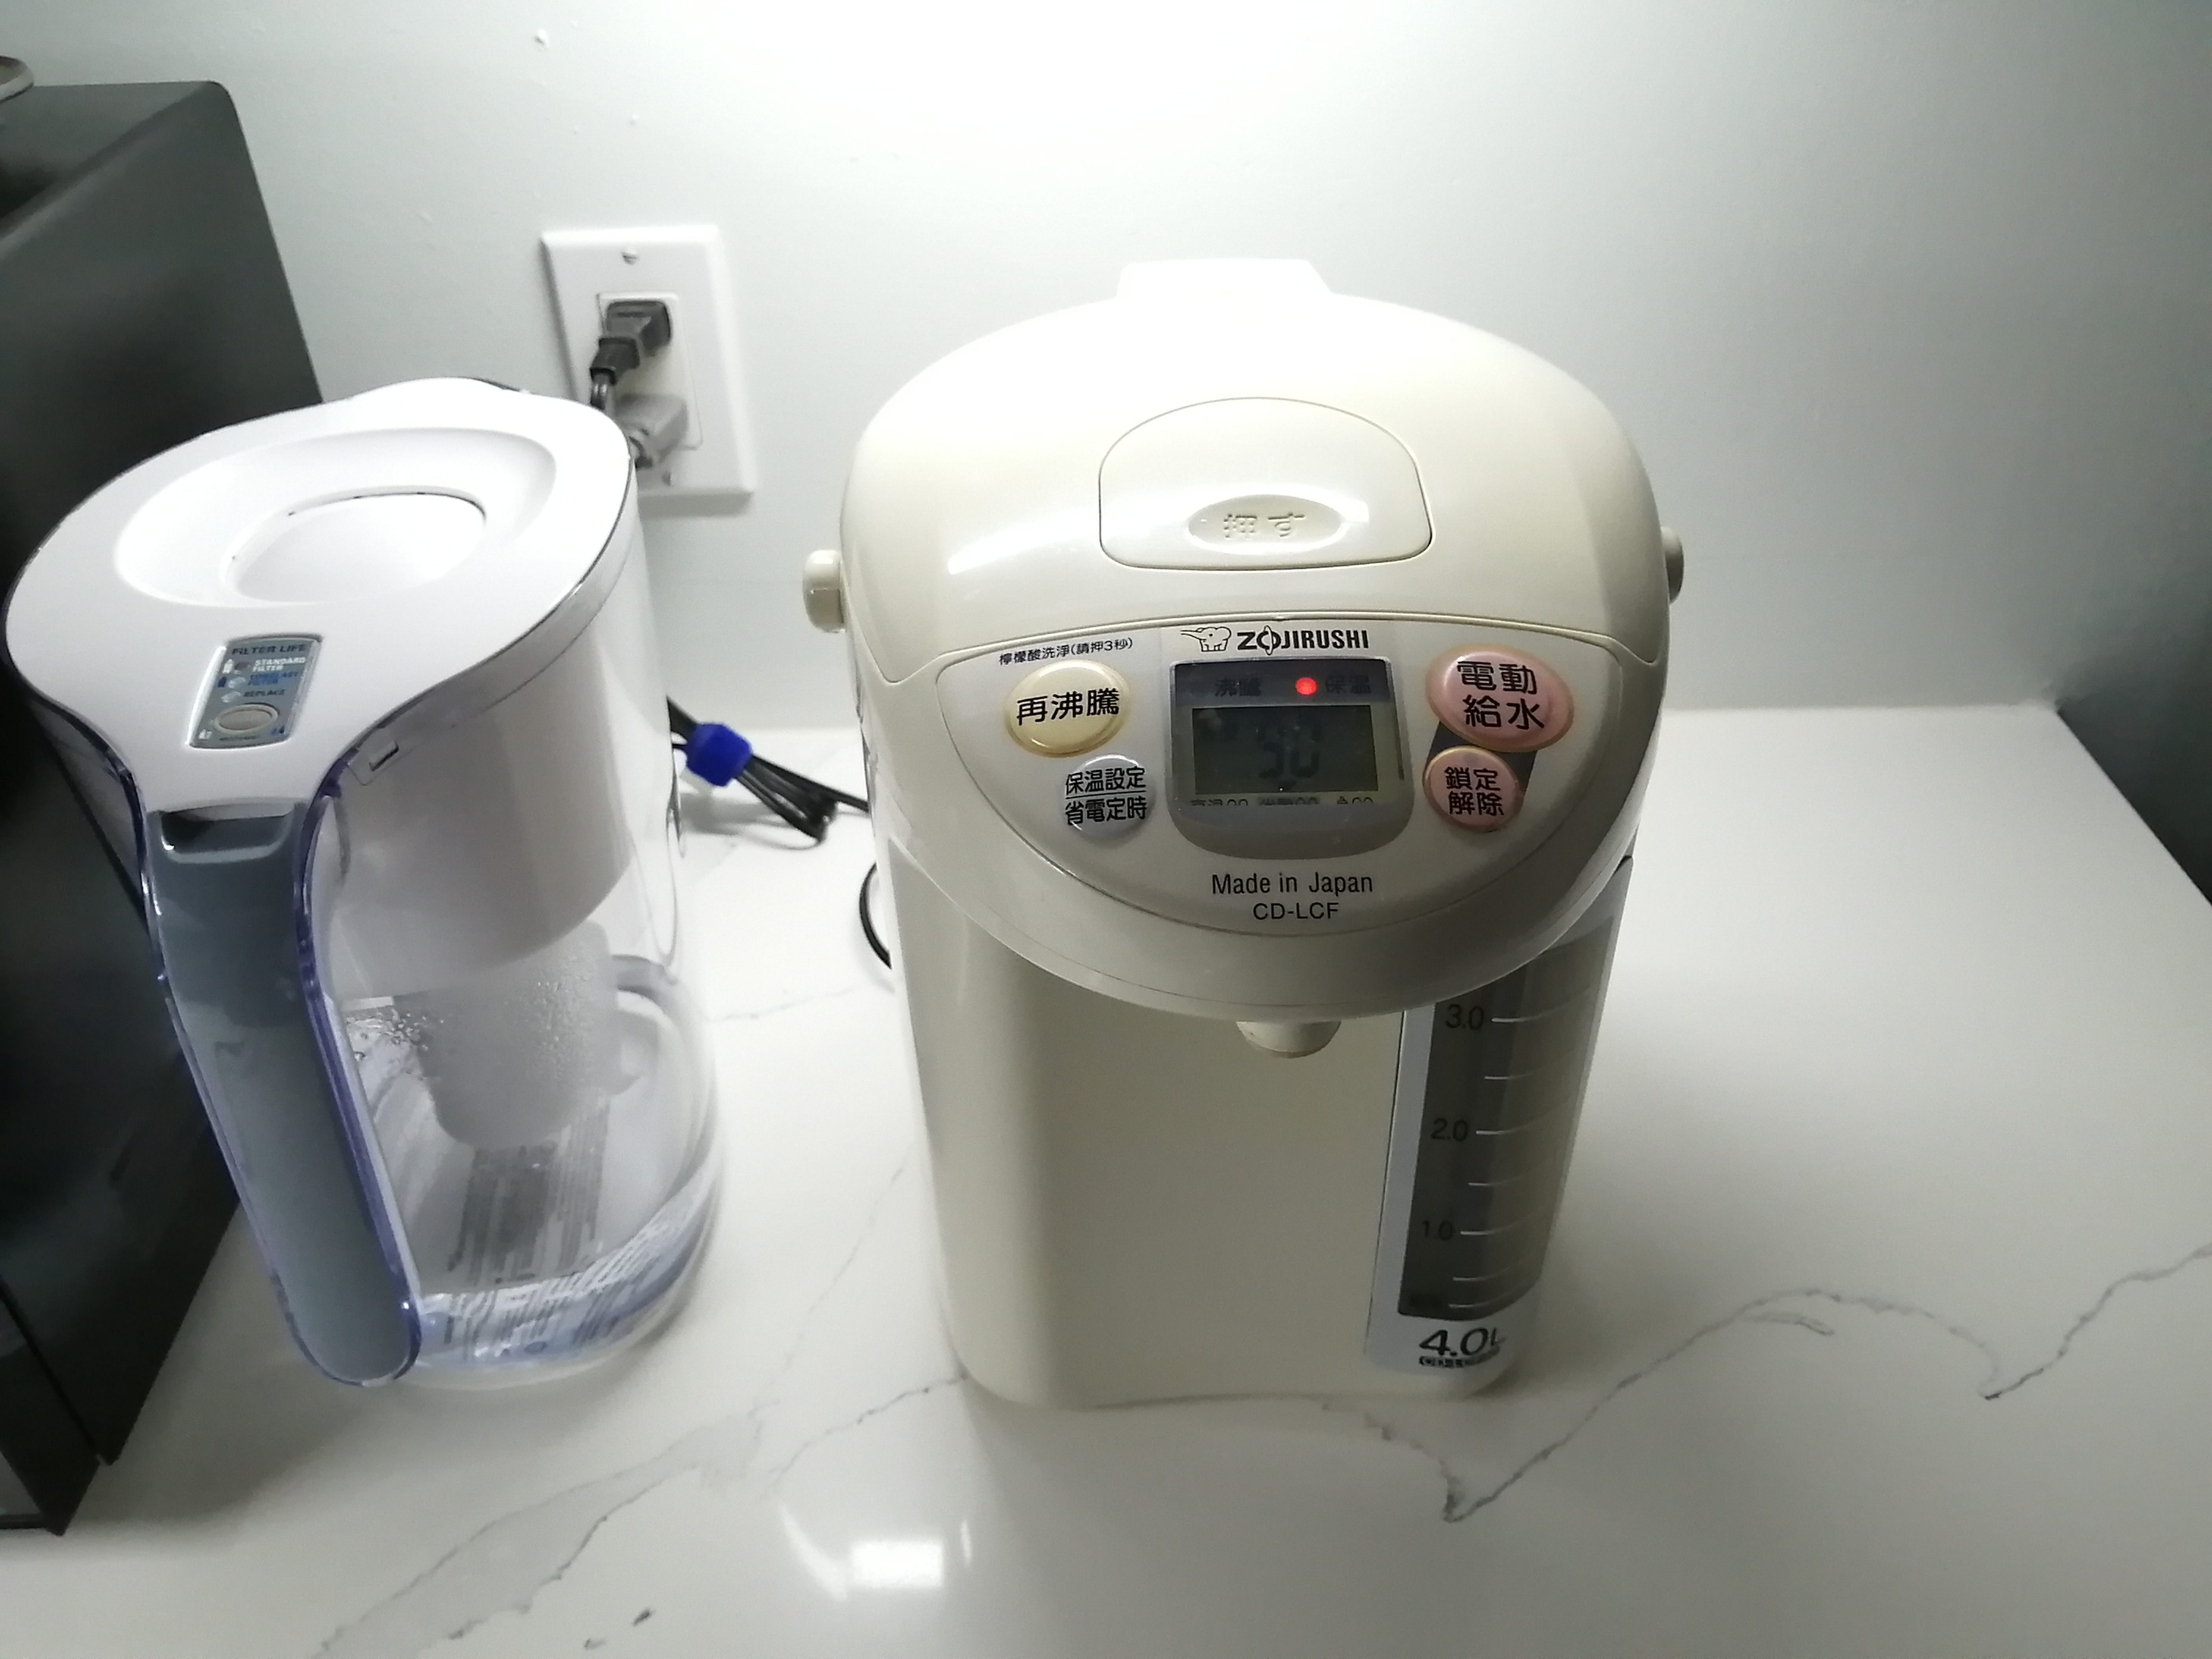 .ca] Zojirushi $205, water boiling thingy commerical made